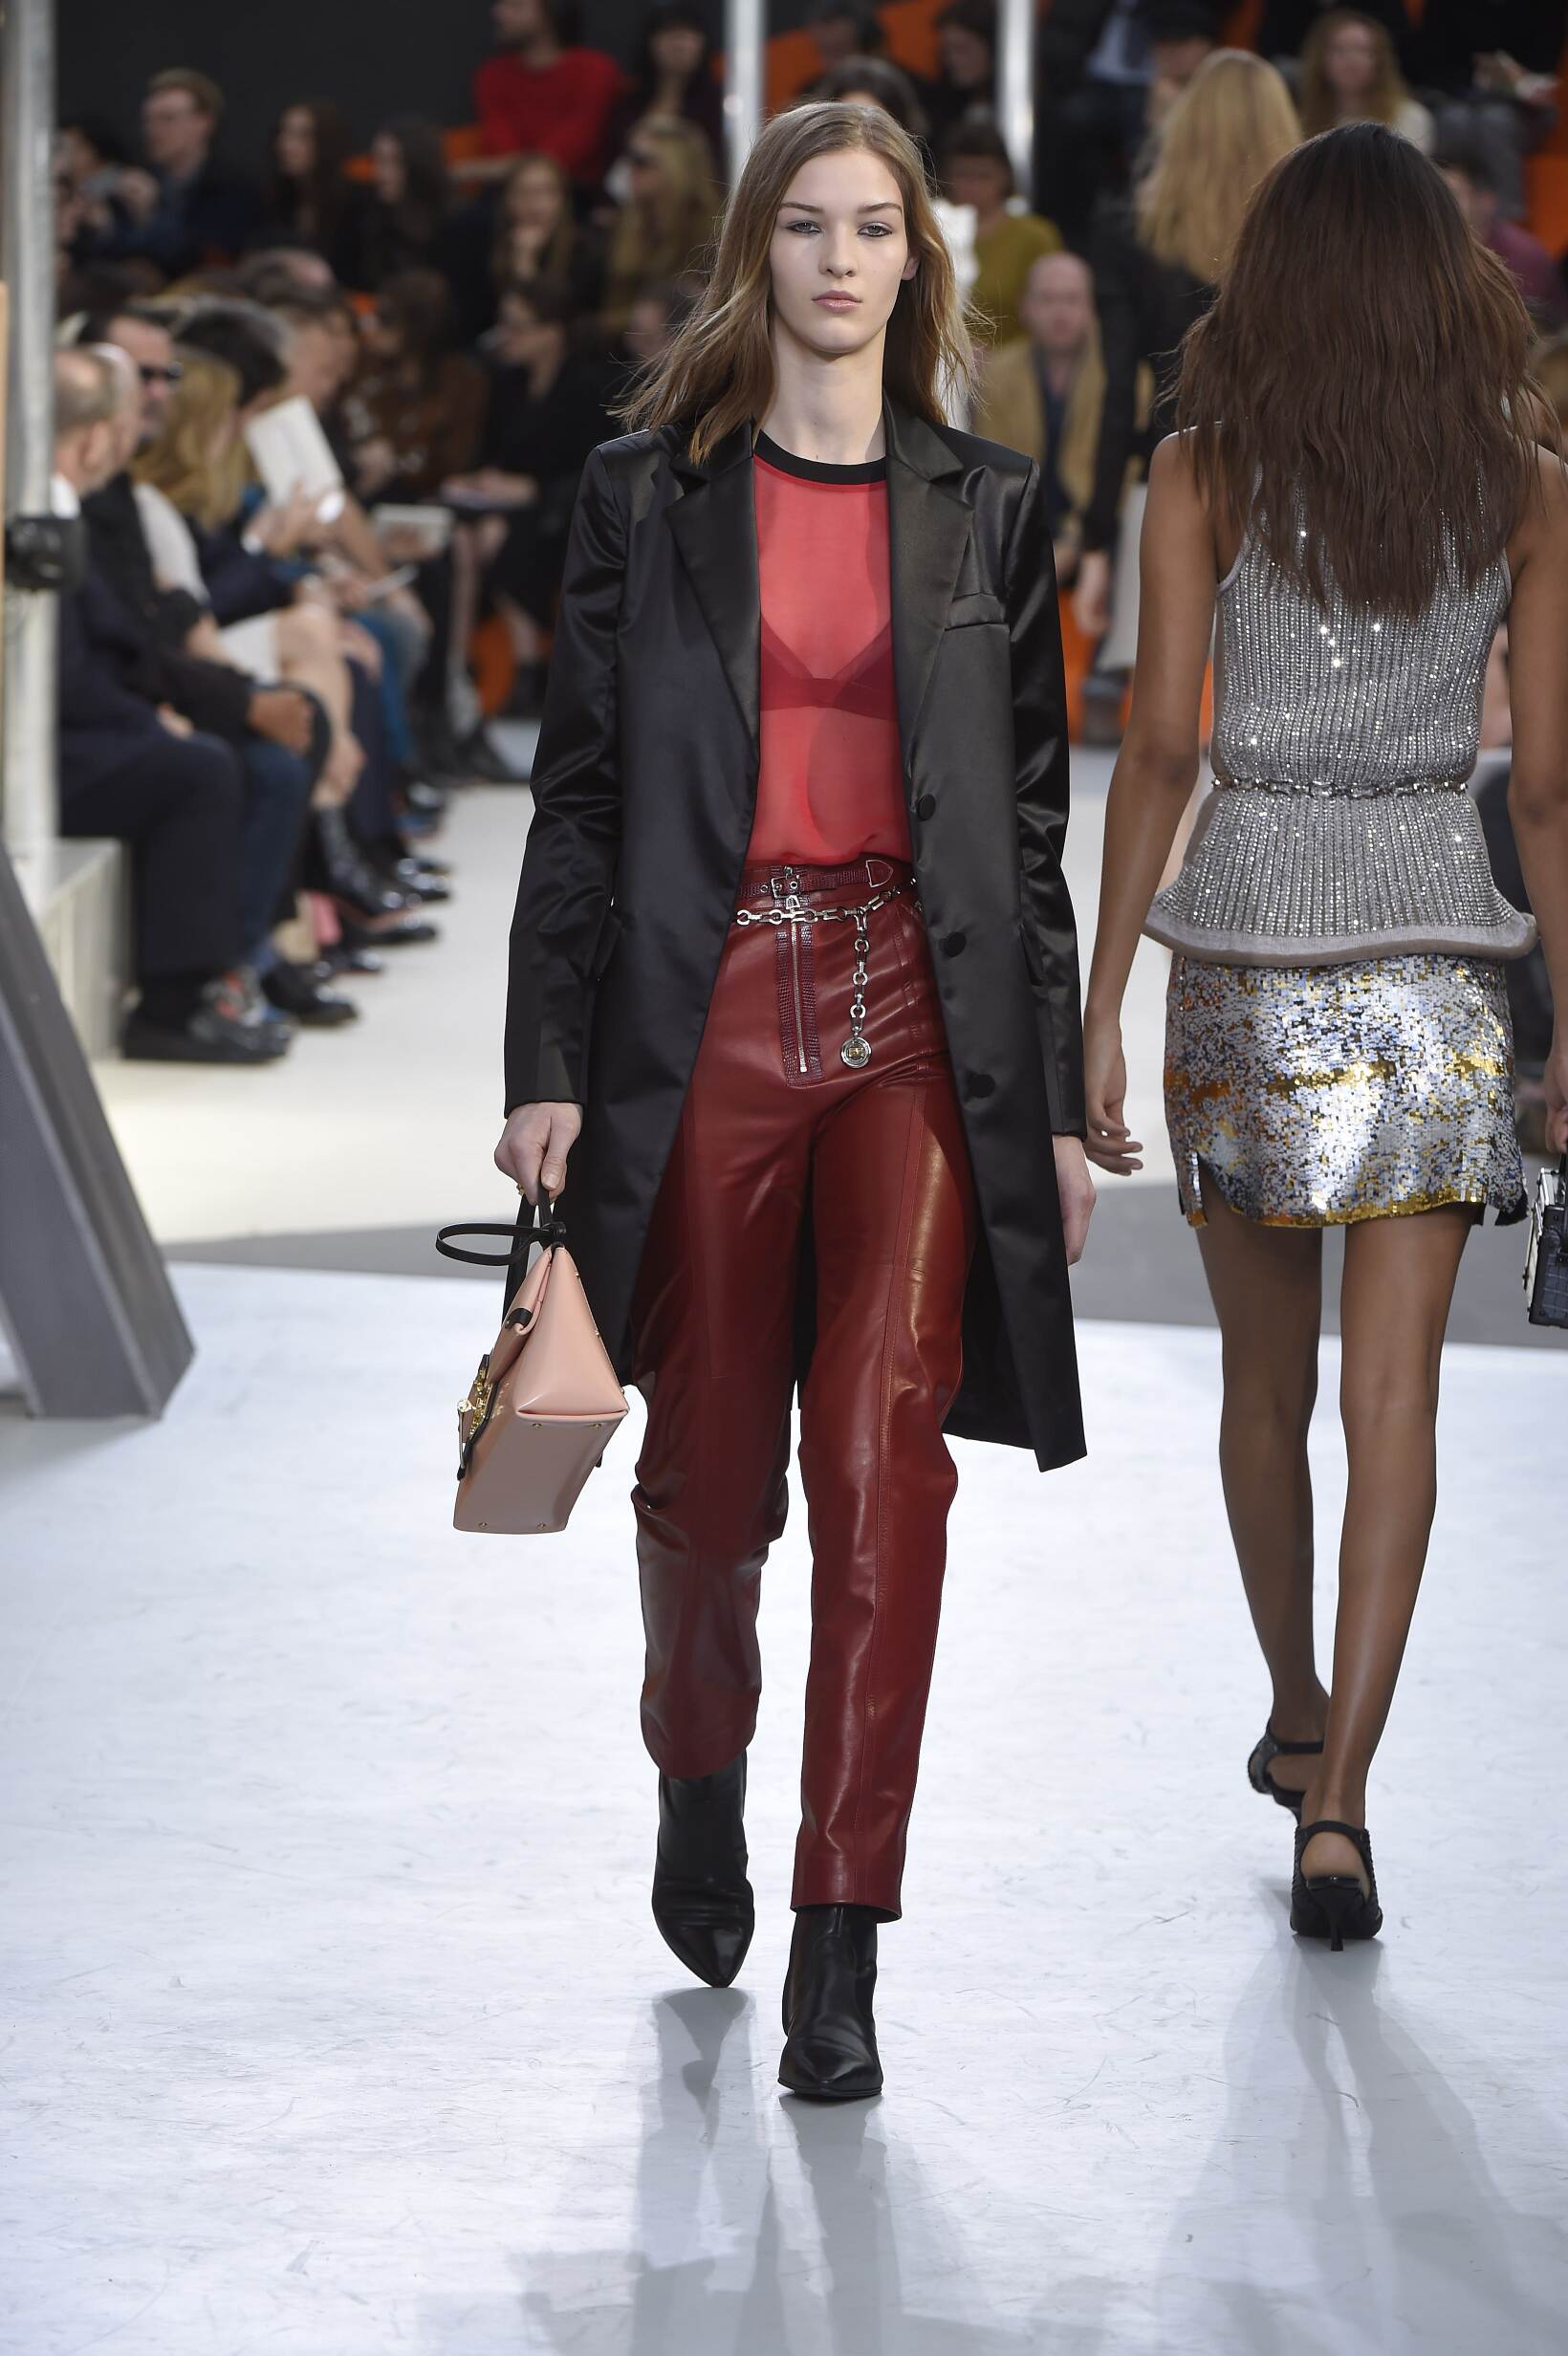 LOUIS VUITTON FALL WINTER 2015-16 WOMEN’S COLLECTION | The Skinny Beep